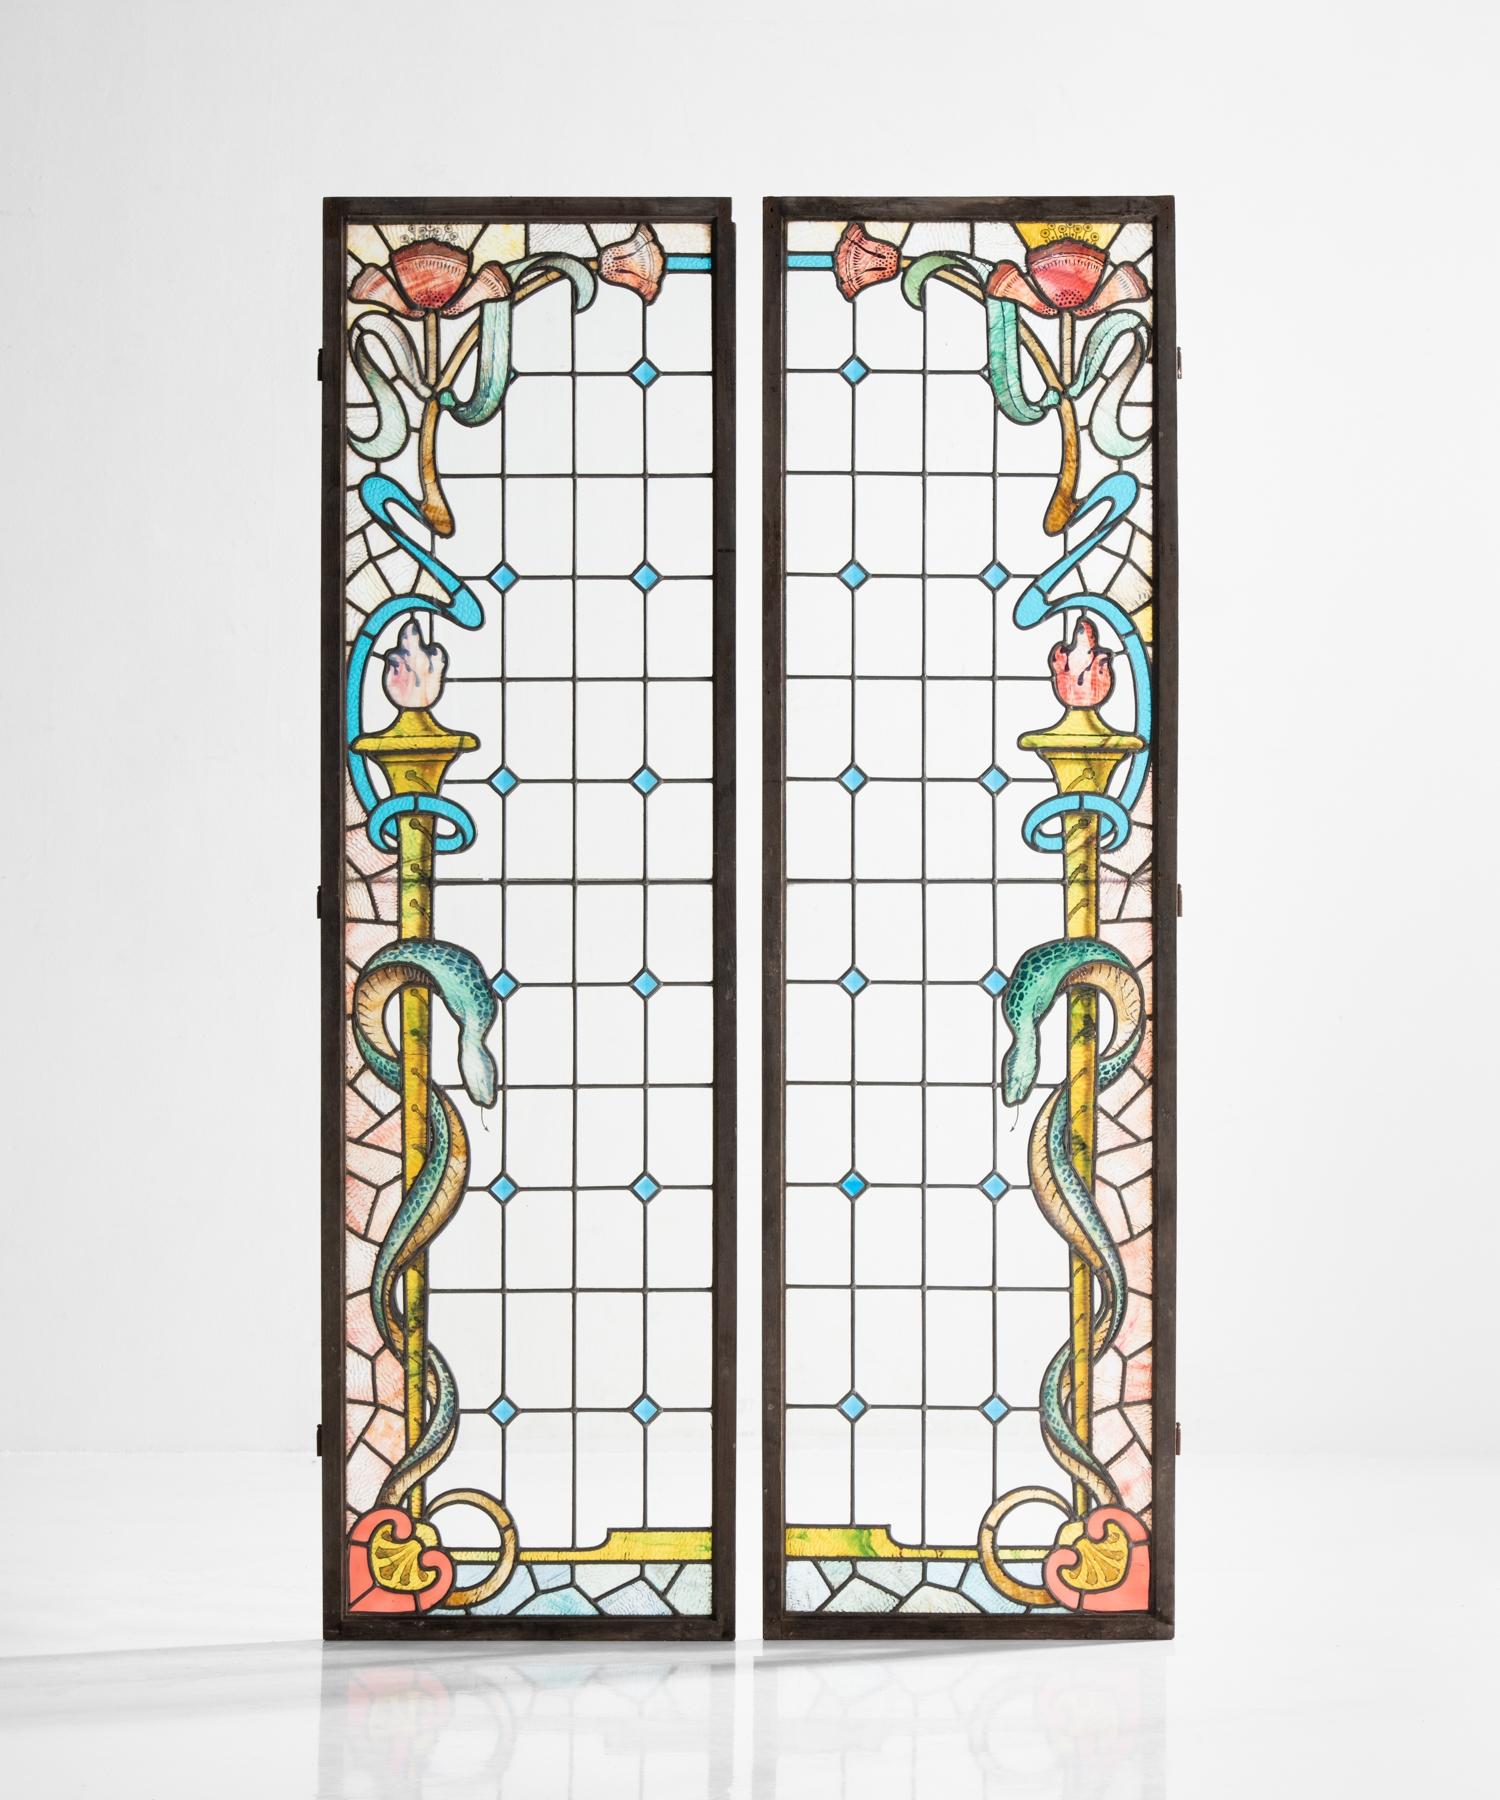 Pair of chemist shop shutters, England, circa 1910.

Simple geometric patterning with elegant border motif on iron-supported glass panes in original wood shutters.